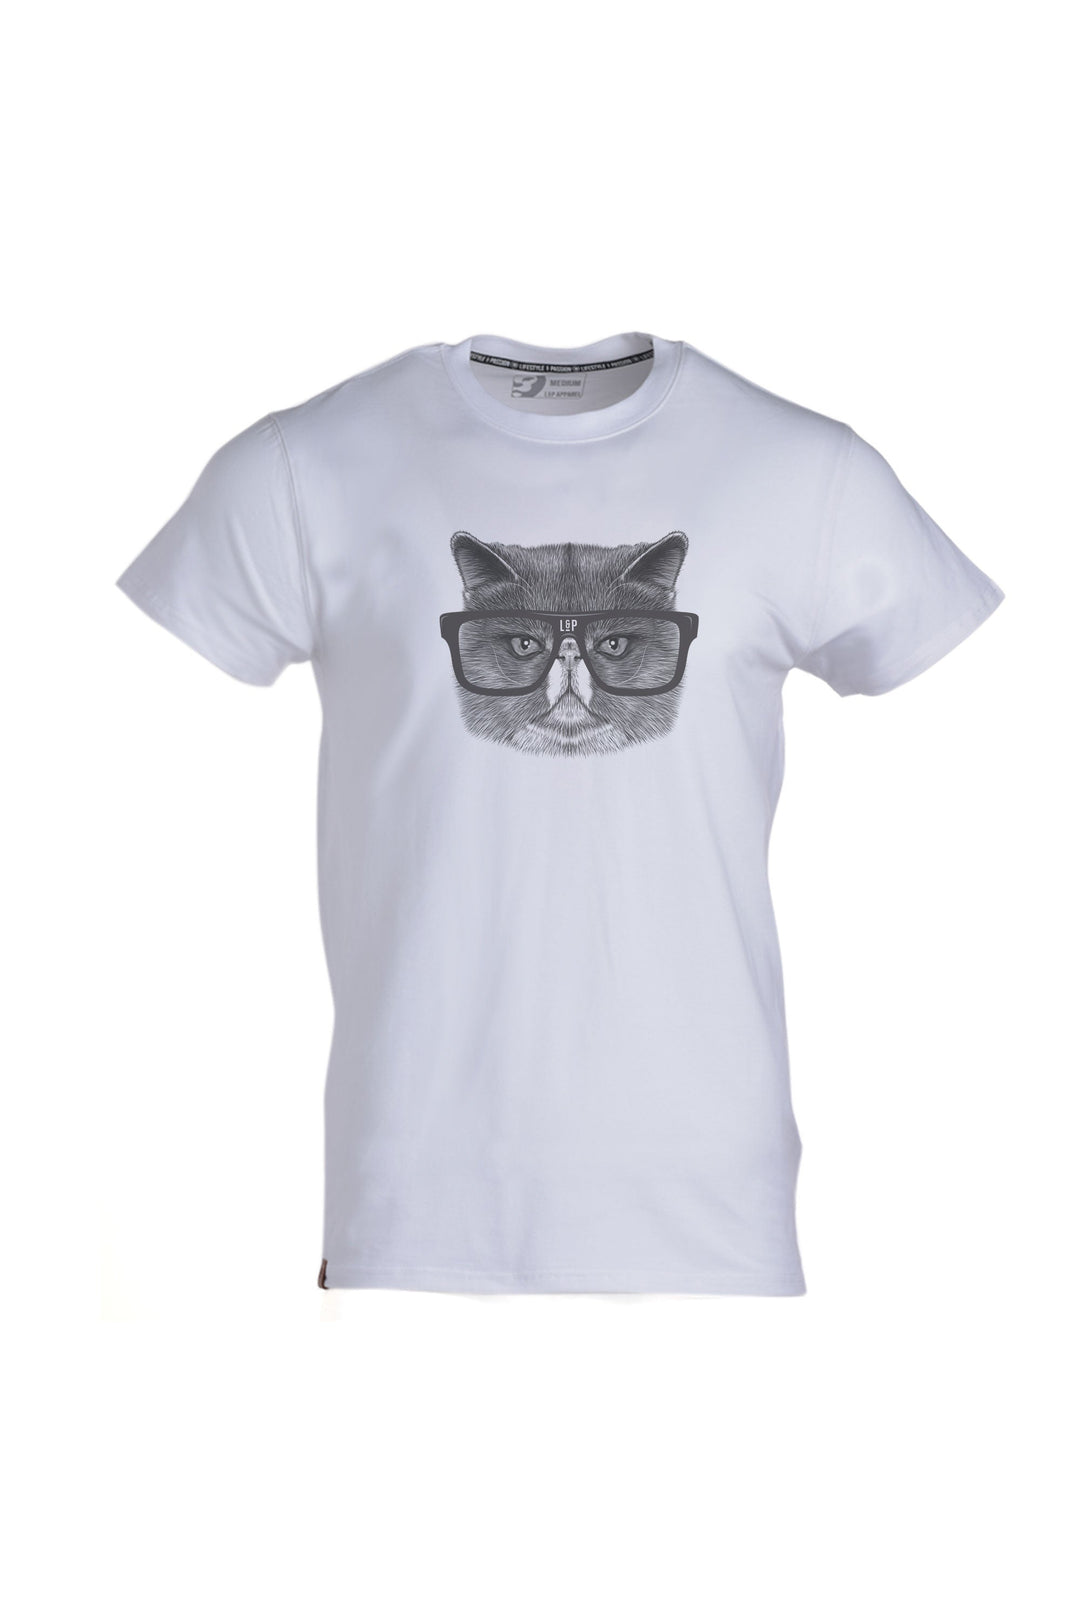 Cotton short sleeve sweater [Angry cat series]